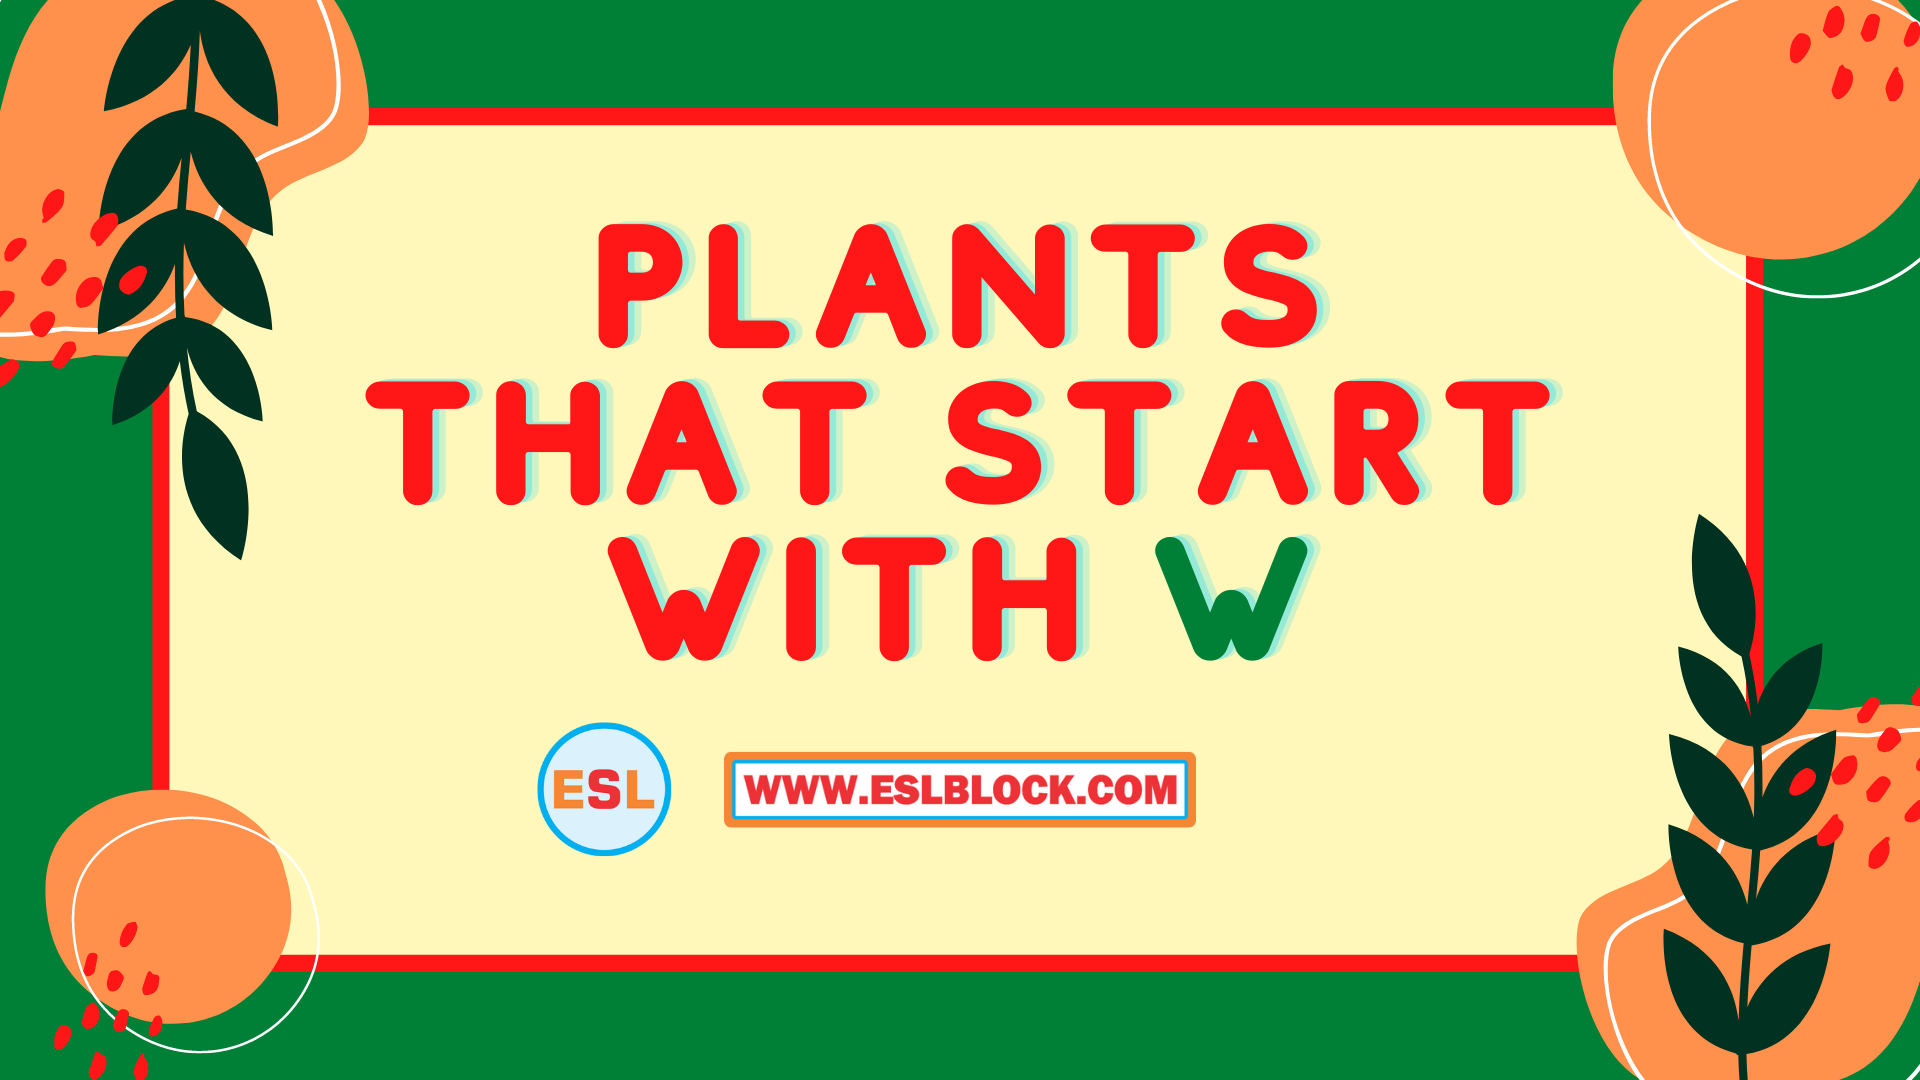 4 Letter Plants, 5 Letter Plants Starting With W, English, English Grammar, English Vocabulary, English Words, List of Plants That Start With W, Plants List, Plants Names, Plants That Start With W, Vocabulary, W Plants, W Plants in English, W Plants Names, Words That Start With W